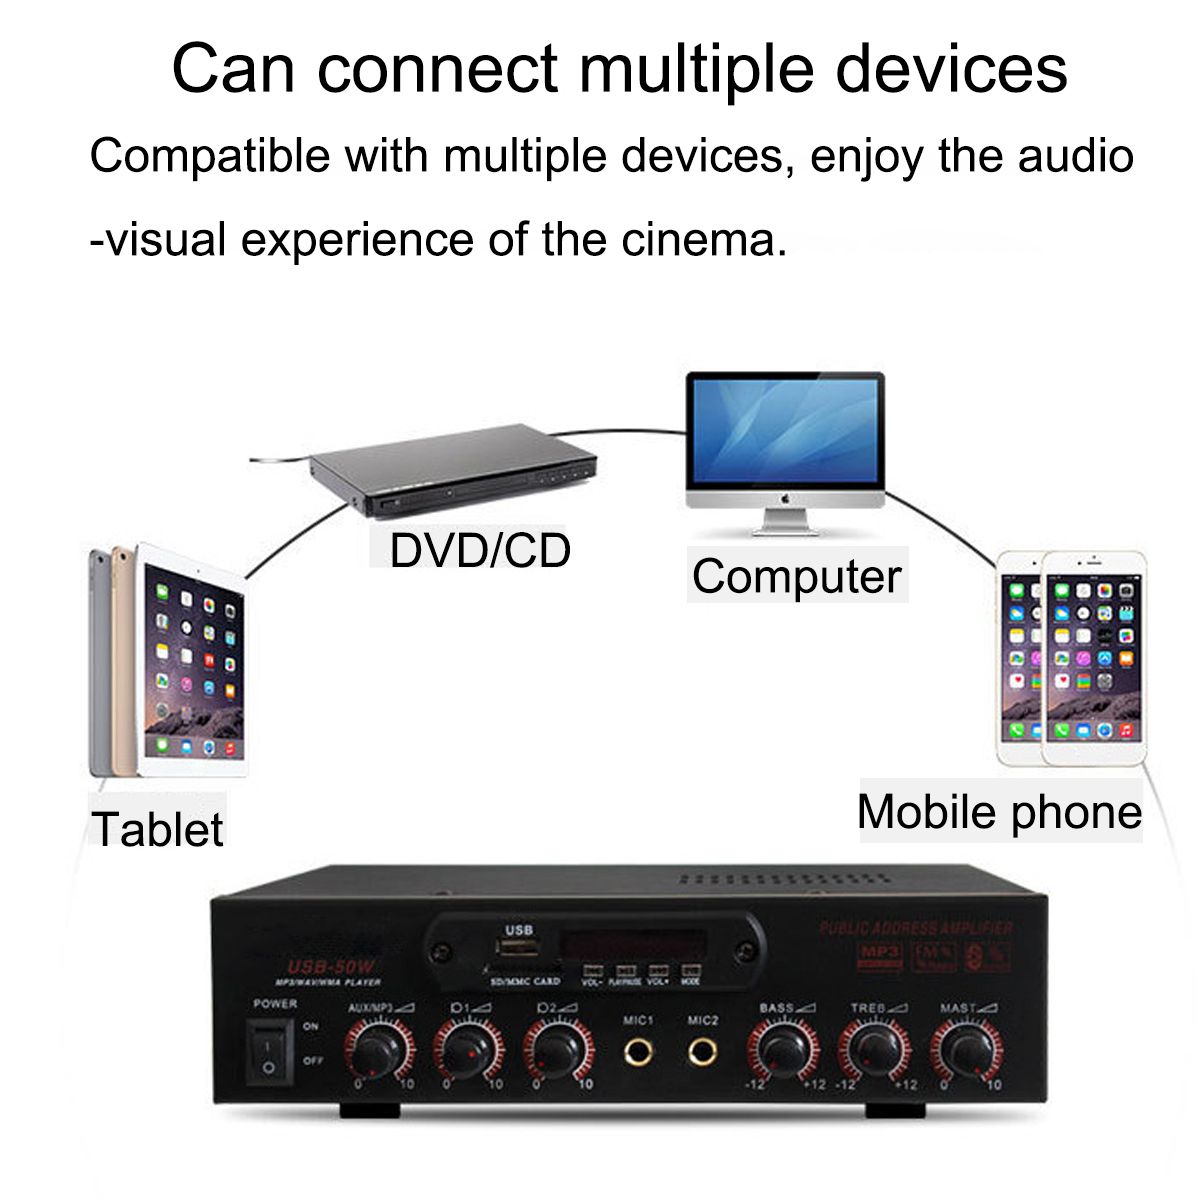 Dual-Microphone-Input-Remote-Control-One-for-Two-bluetooth-Amplifier-with-Ceiling-Speaker-Set-1636292